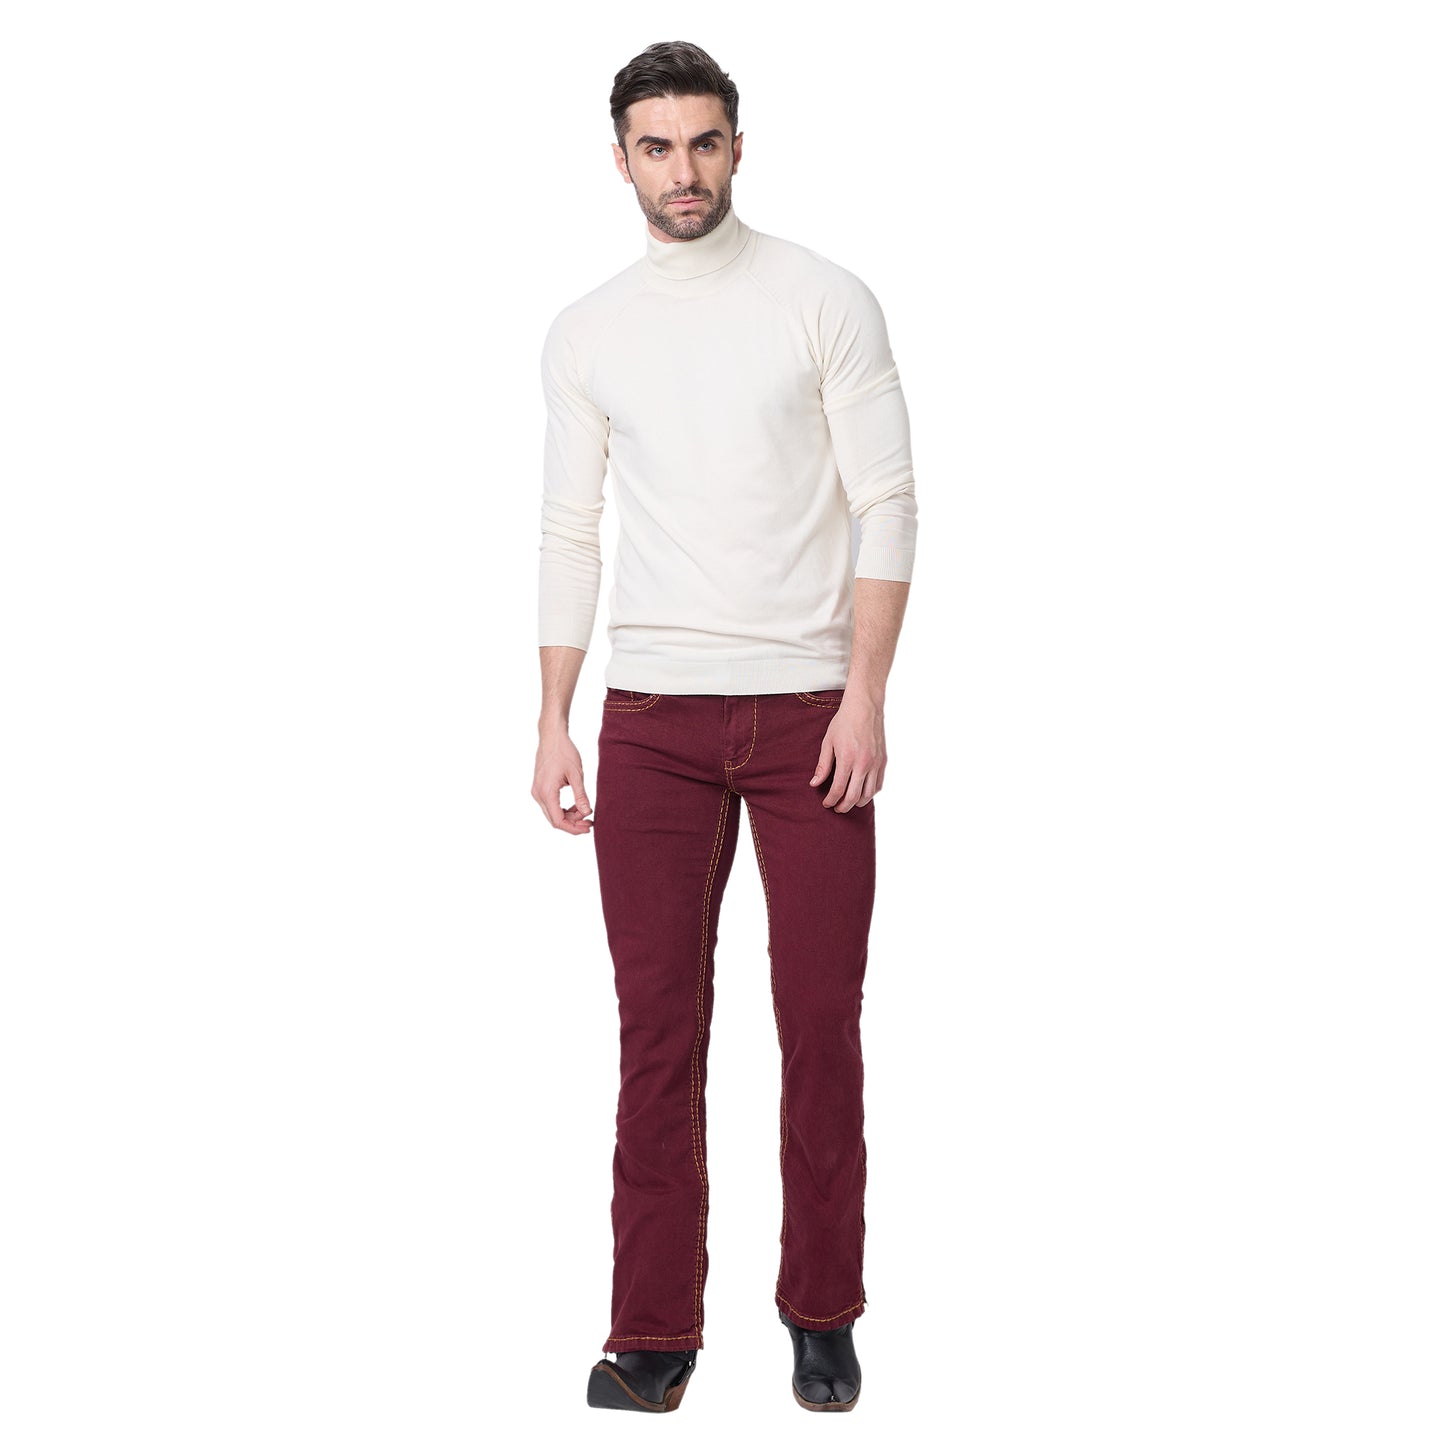 Mens Maroon Bootcut Slim Fit Jeans With Strechable Saddle Stitch